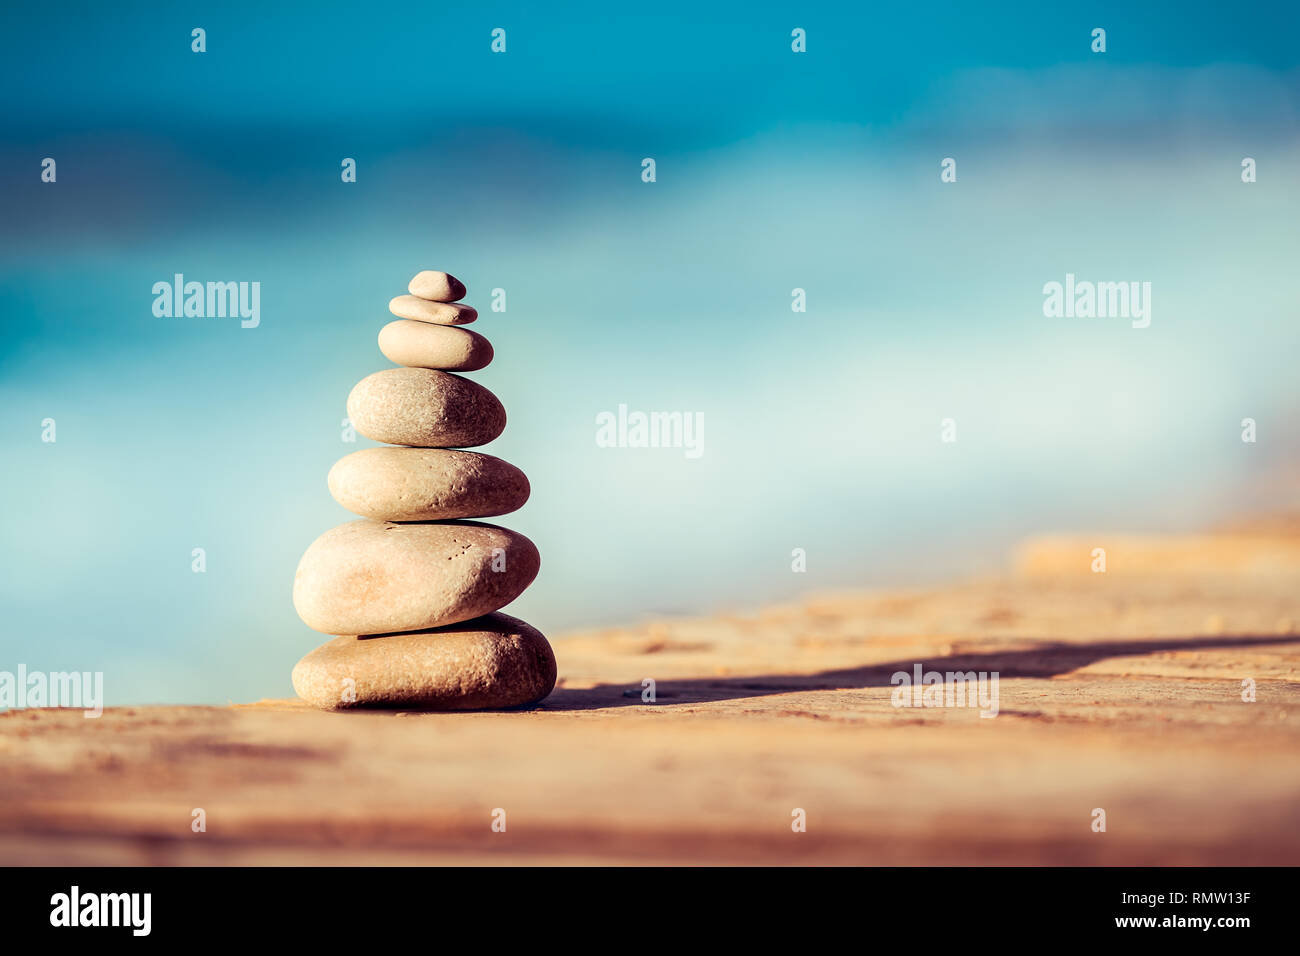 Closeup photo of a pebbles stack on the bridge over sea, spa stones, inner peace and life in balance concept Stock Photo